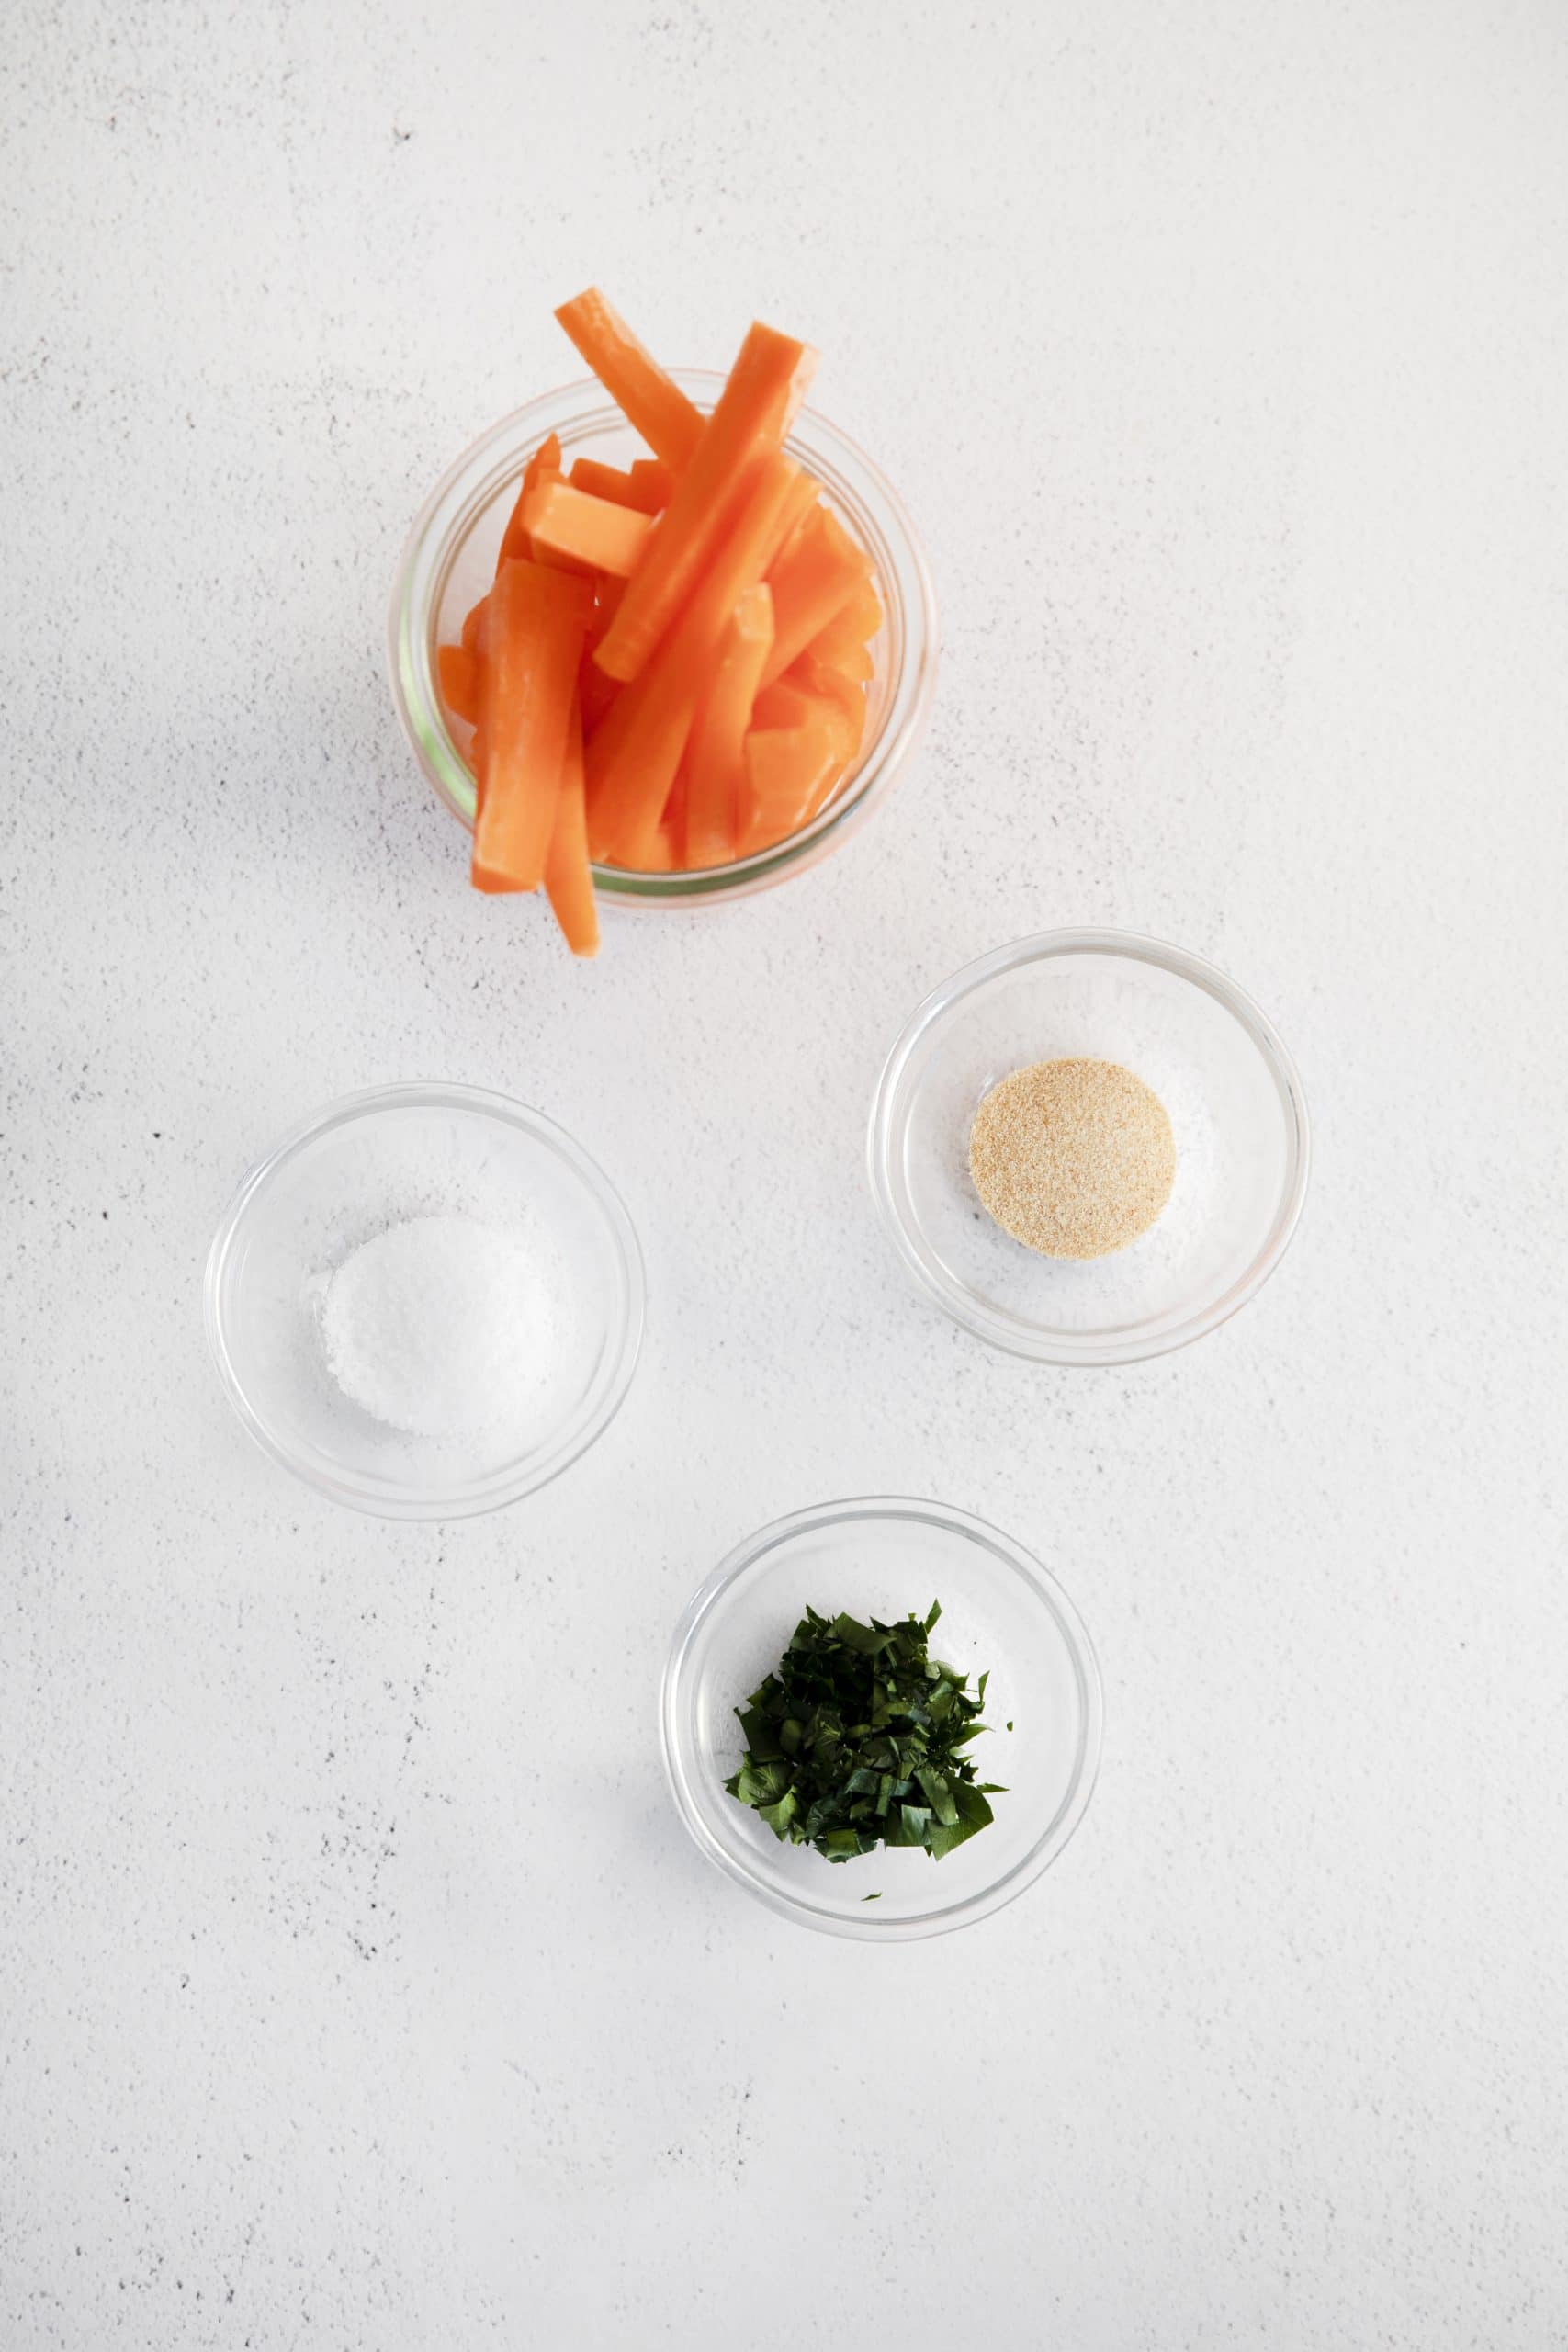 Ingredients for air fryer carrot fries, each in separate dishes on a countertop